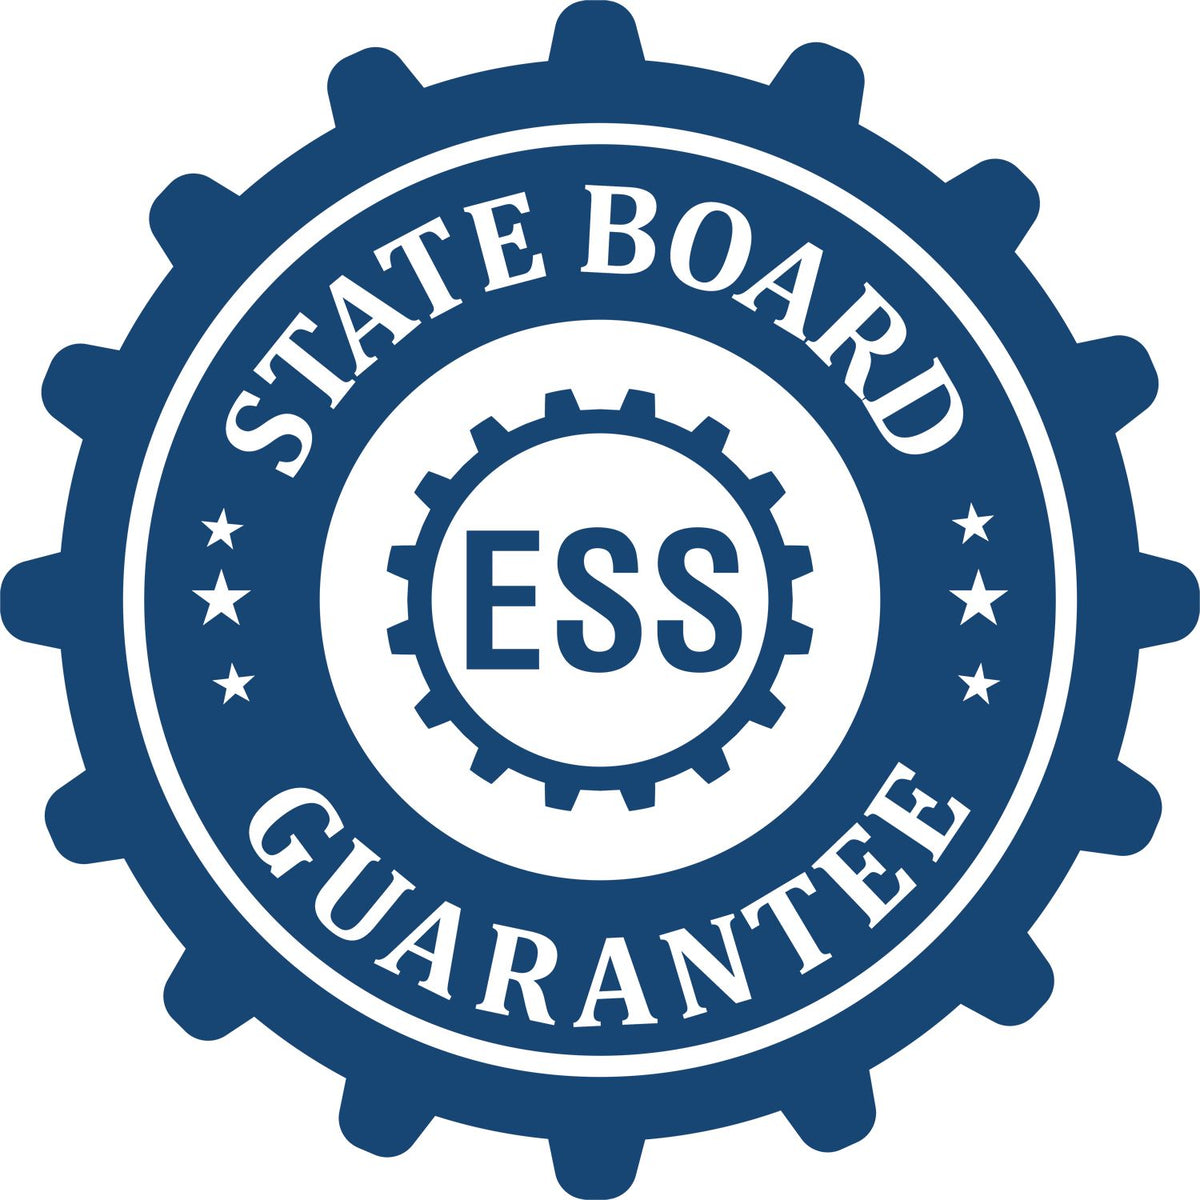 An emblem in a gear shape illustrating a state board guarantee for the Soft Guam Professional Engineer Seal product.